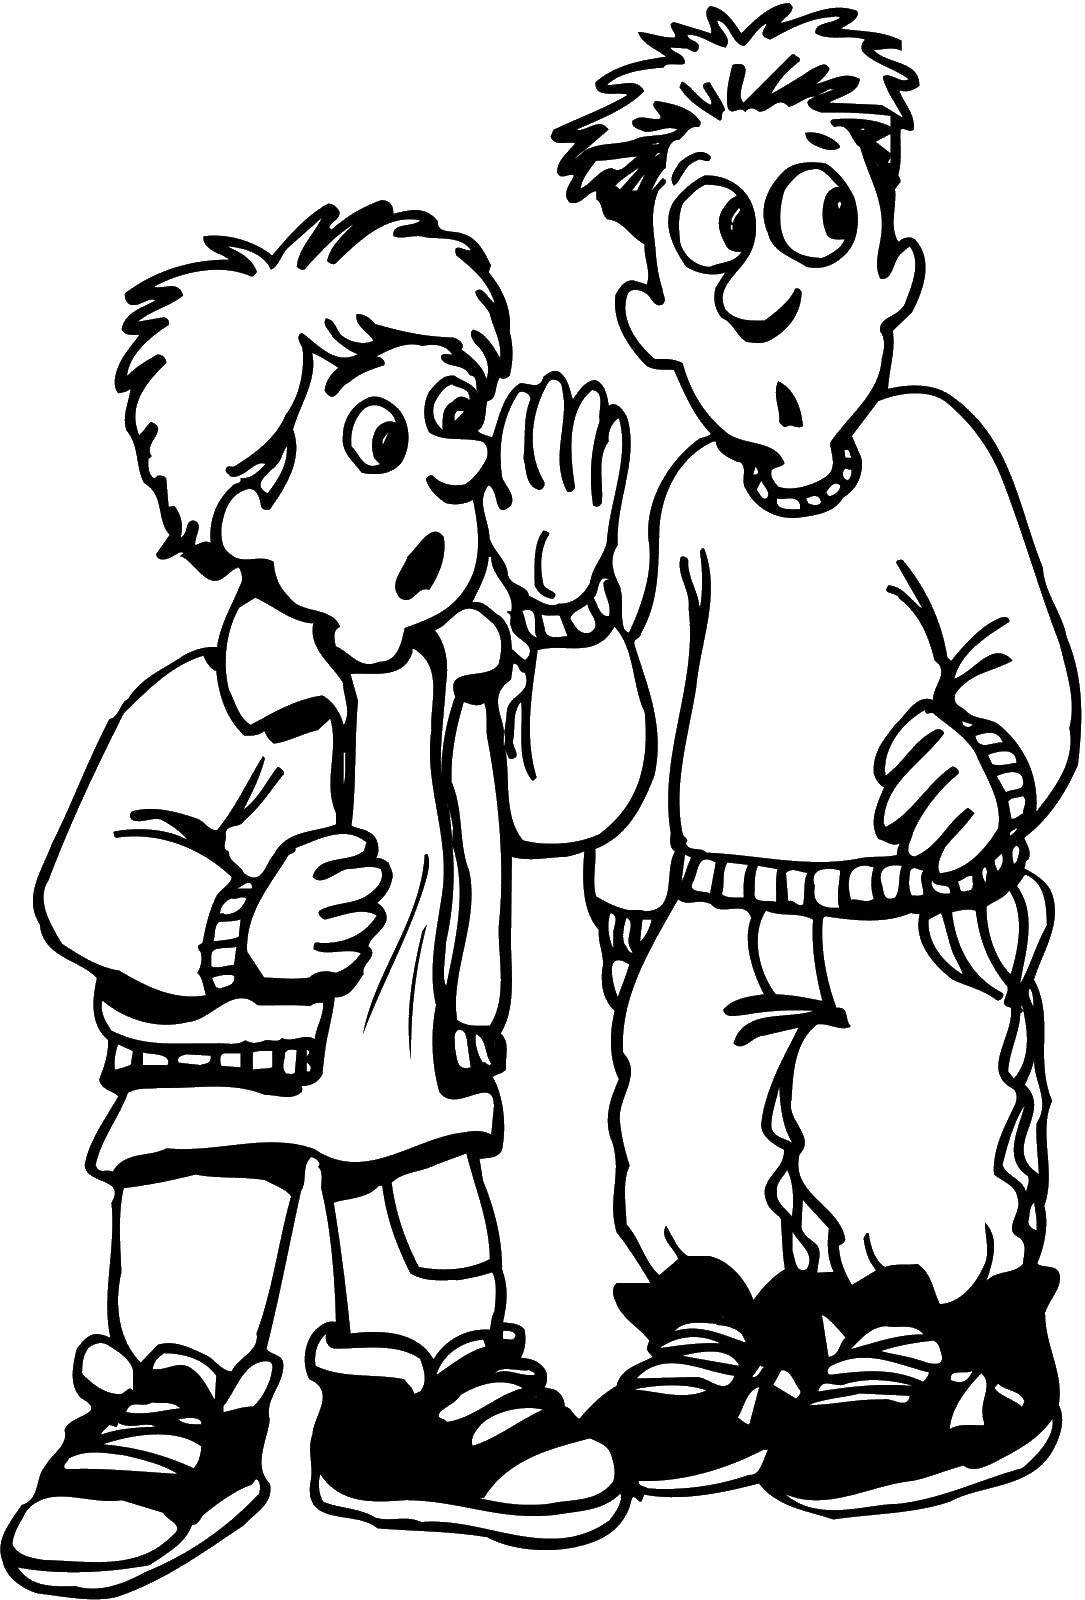 Coloring Two boys whispering. Category children. Tags:  children, boys.